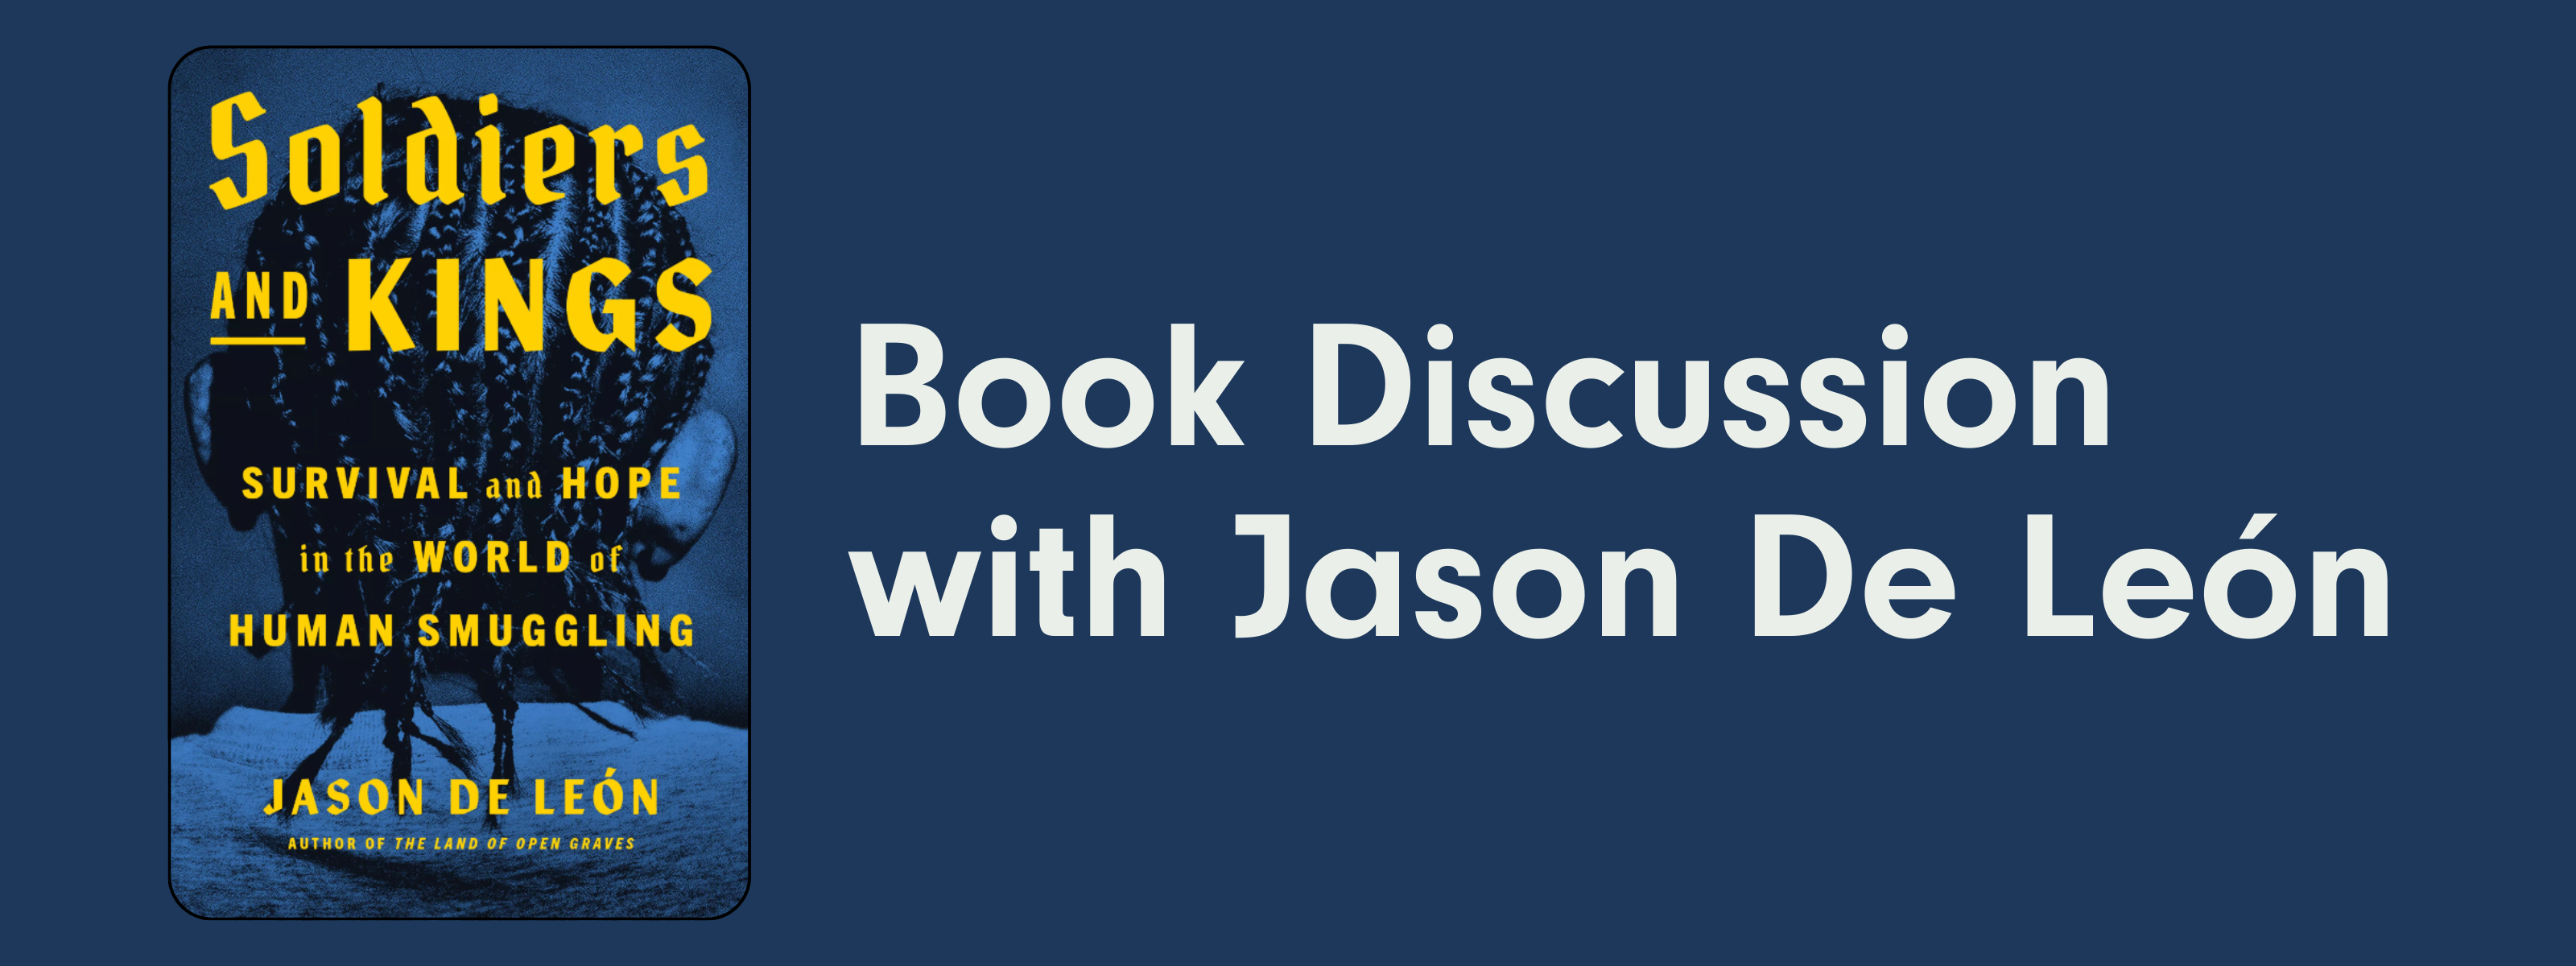 A graphic image with a blue background, the book cover for Soldiers and Kings: Survival and Hope in the world of human smuggling, and white text that says "Book Discussion with Jason De León"